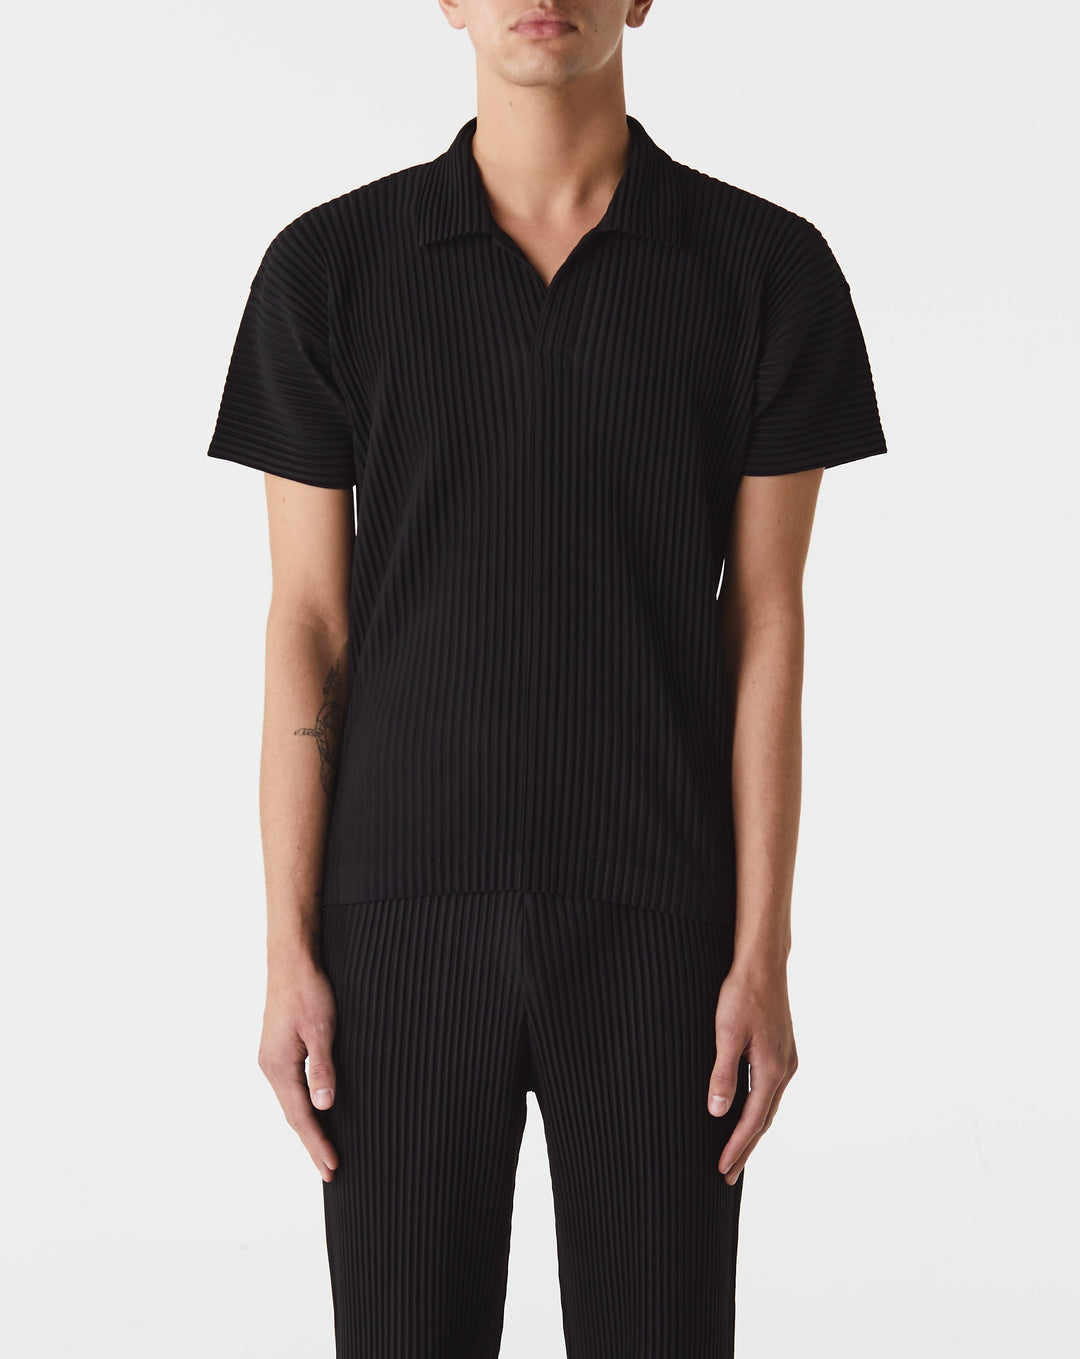 Topman co-ord monogram polo with contrast collar in navy Kent & Curwen stripe detail rose patch polo shirt  - Cheap Erlebniswelt-fliegenfischen Jordan outlet